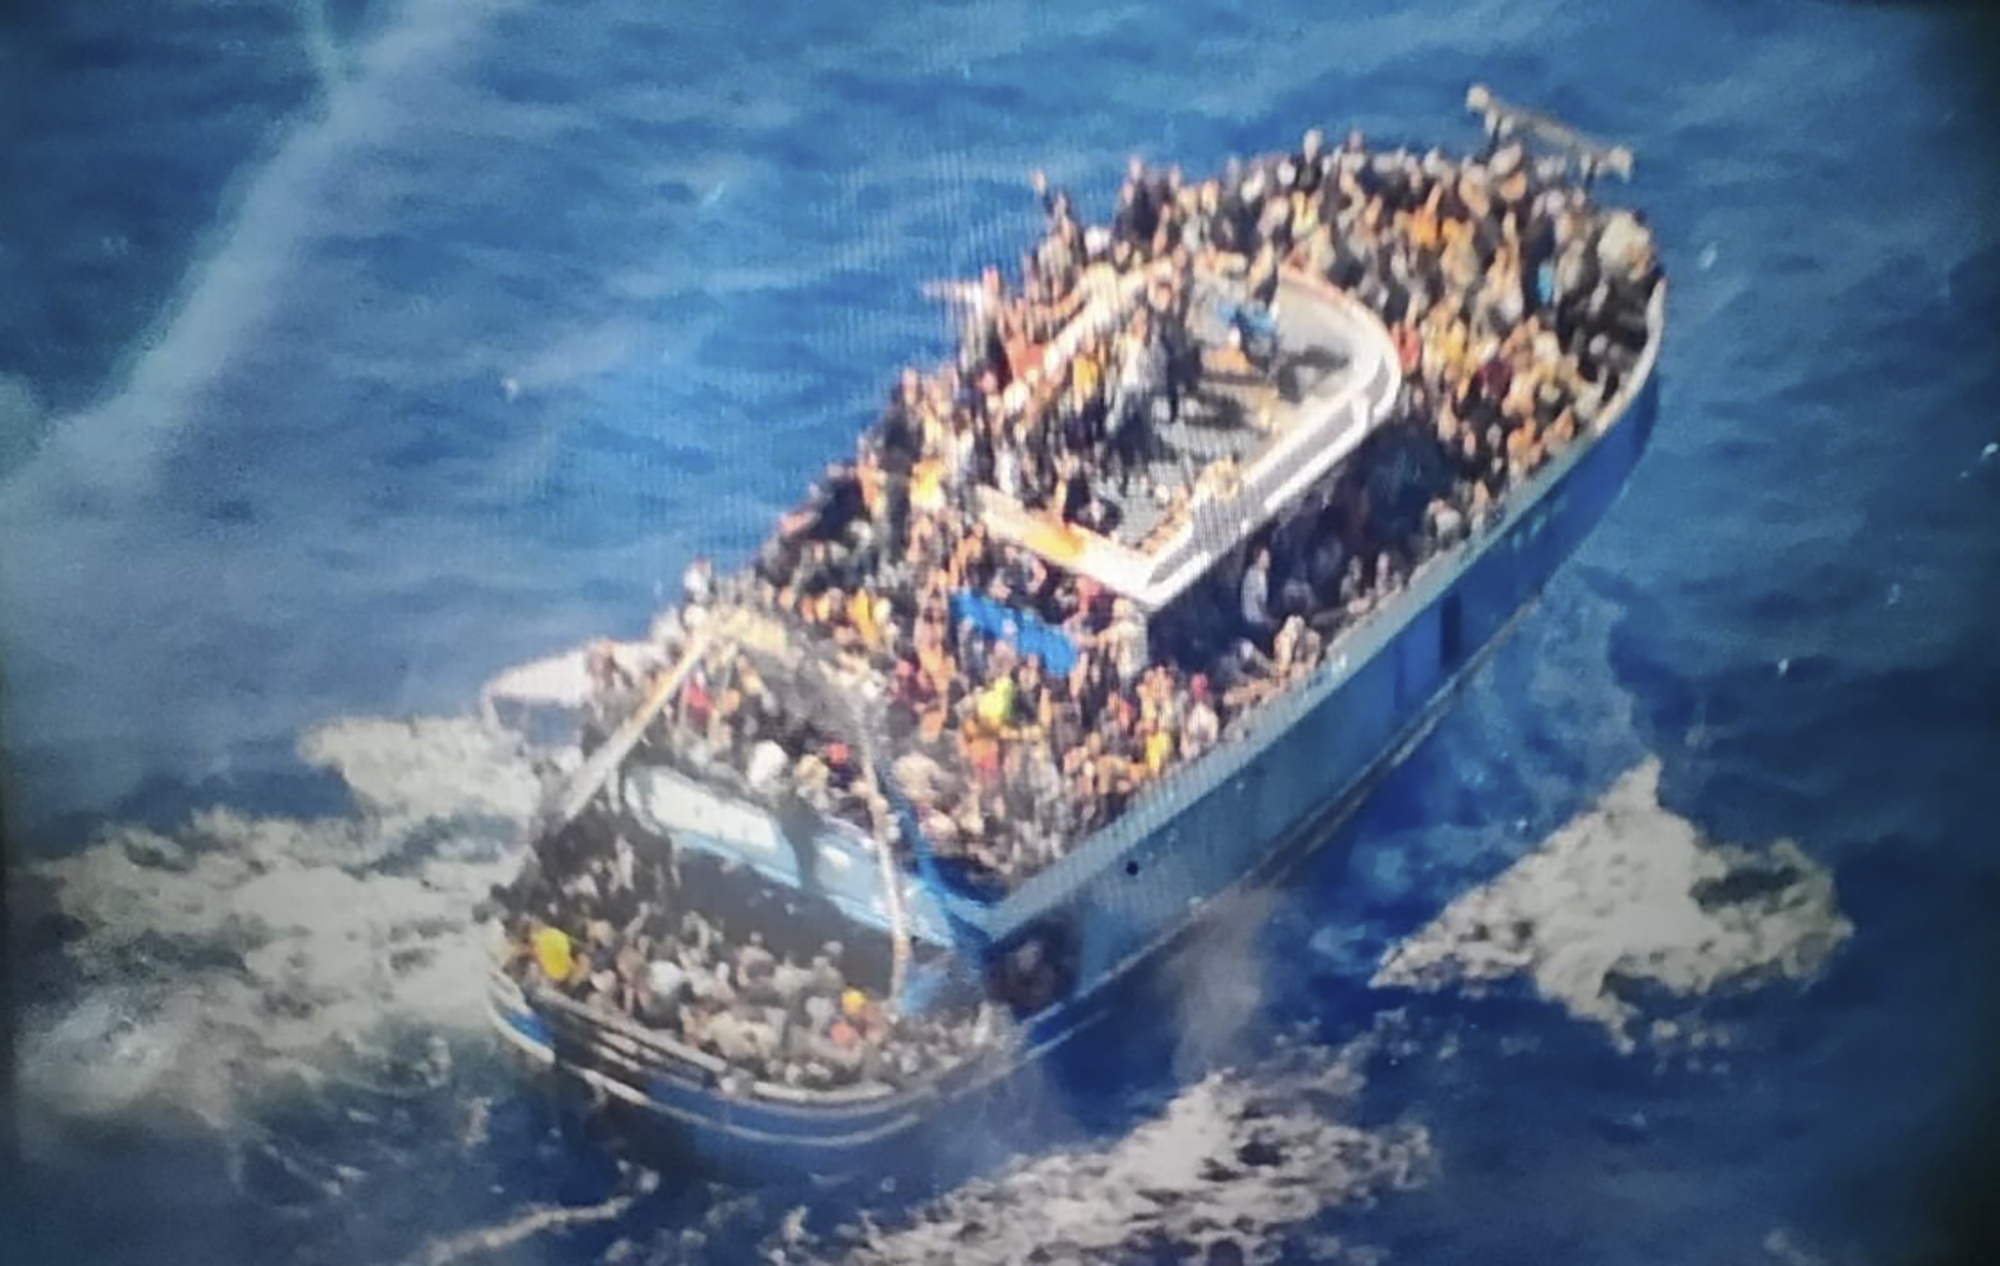 At least 79 dead after migrant boat, possibly from Libya, capsizes enroute to Italy